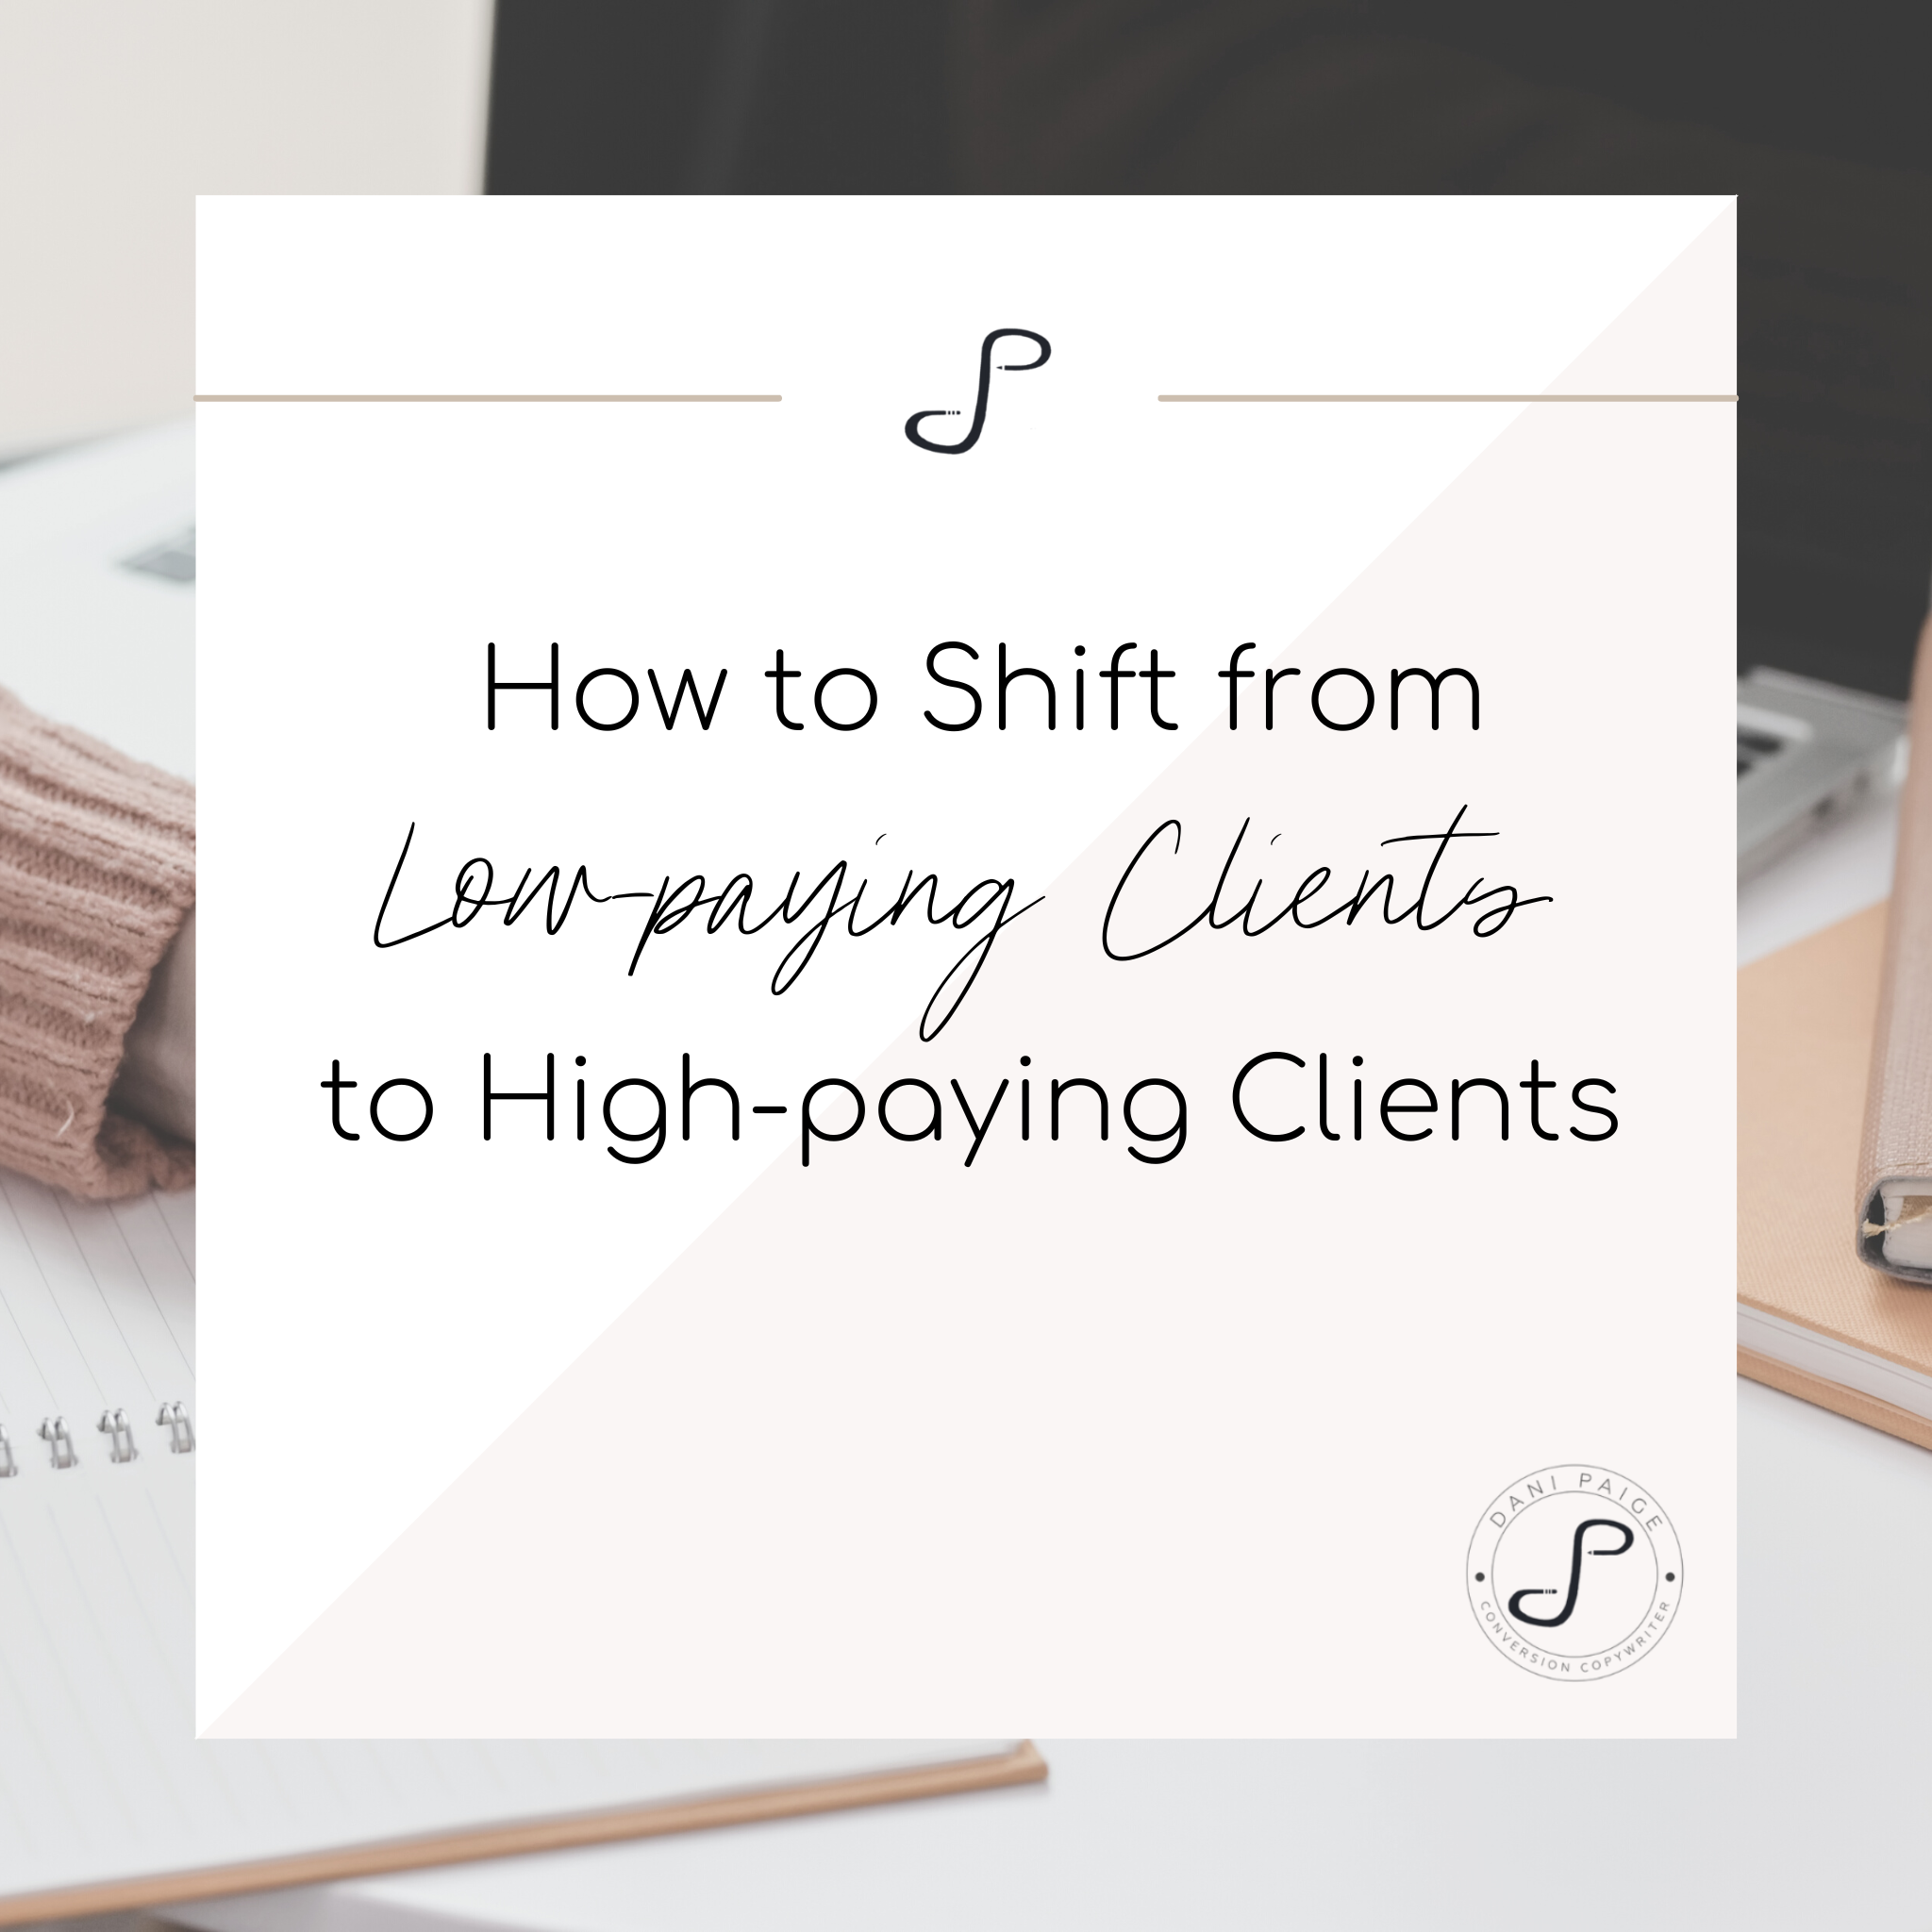 How to Shift from Low-paying Clients to High-paying Clients